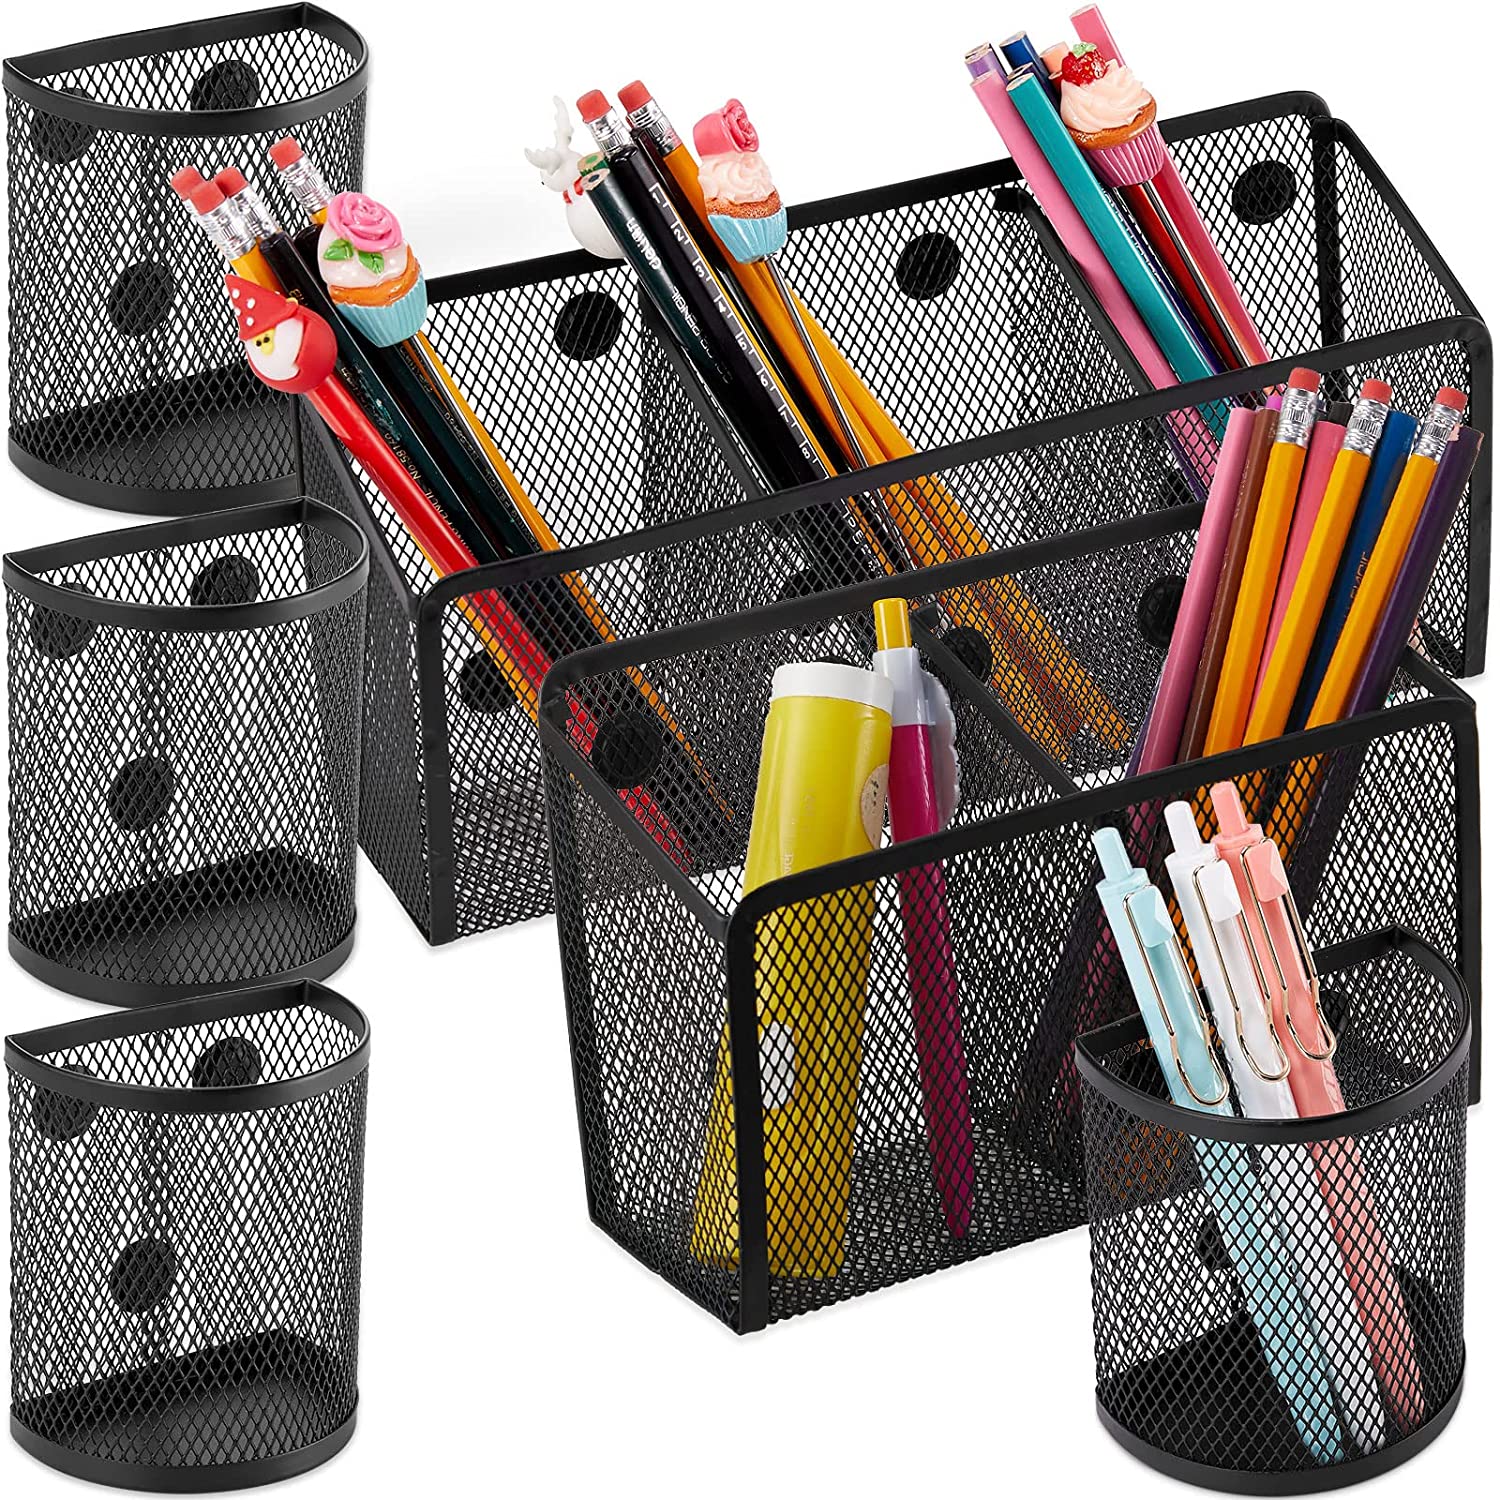 Casewin 6 Pack Magnetic Pencil Holder Magnetic Storage Basket Organizer  Metal Magnetic Pen Holder for Refrigerator Whiteboard Locker Accessories  School Office Supplies Organizers 